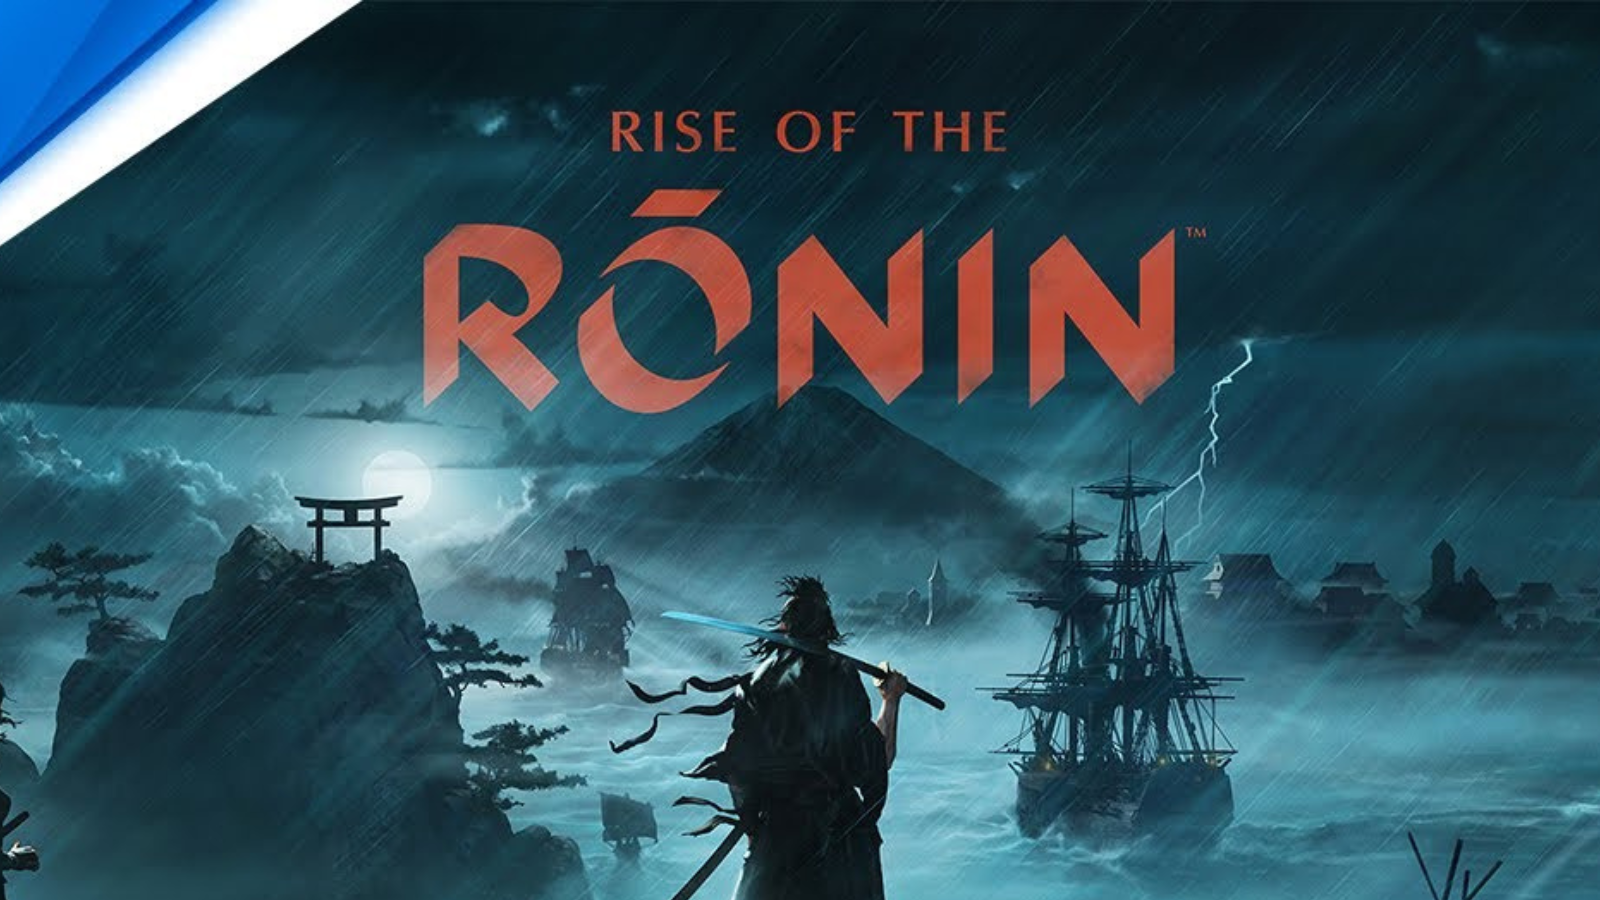 Team Ninja's PS5 Exclusive Rise Of The Ronin Gets Mature ESRB Rating